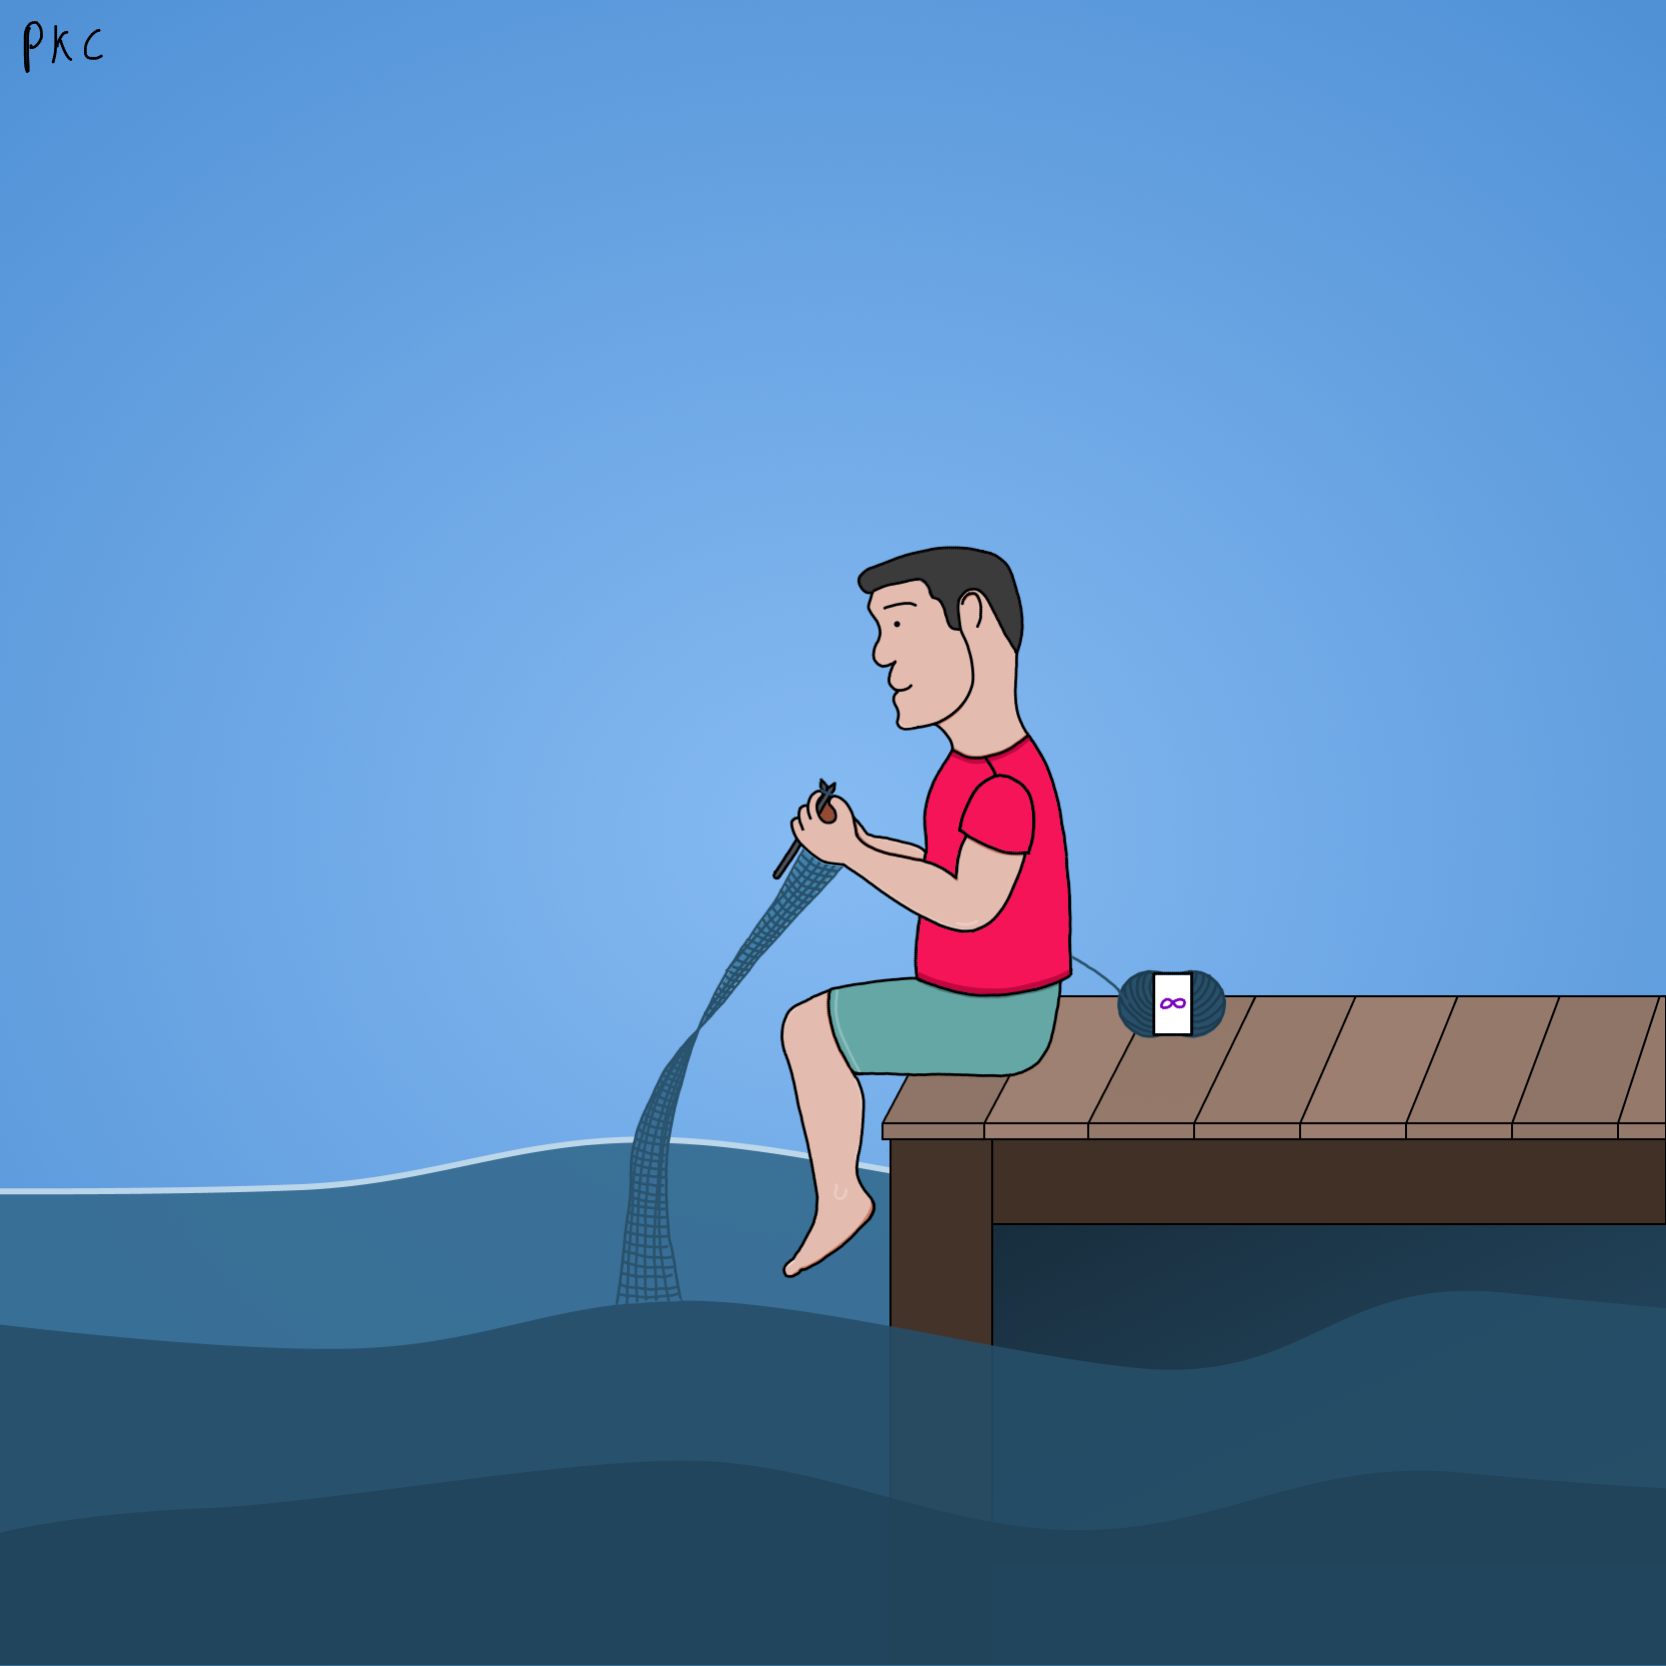 spouse-man sitting on a dock, knitting into the ocean